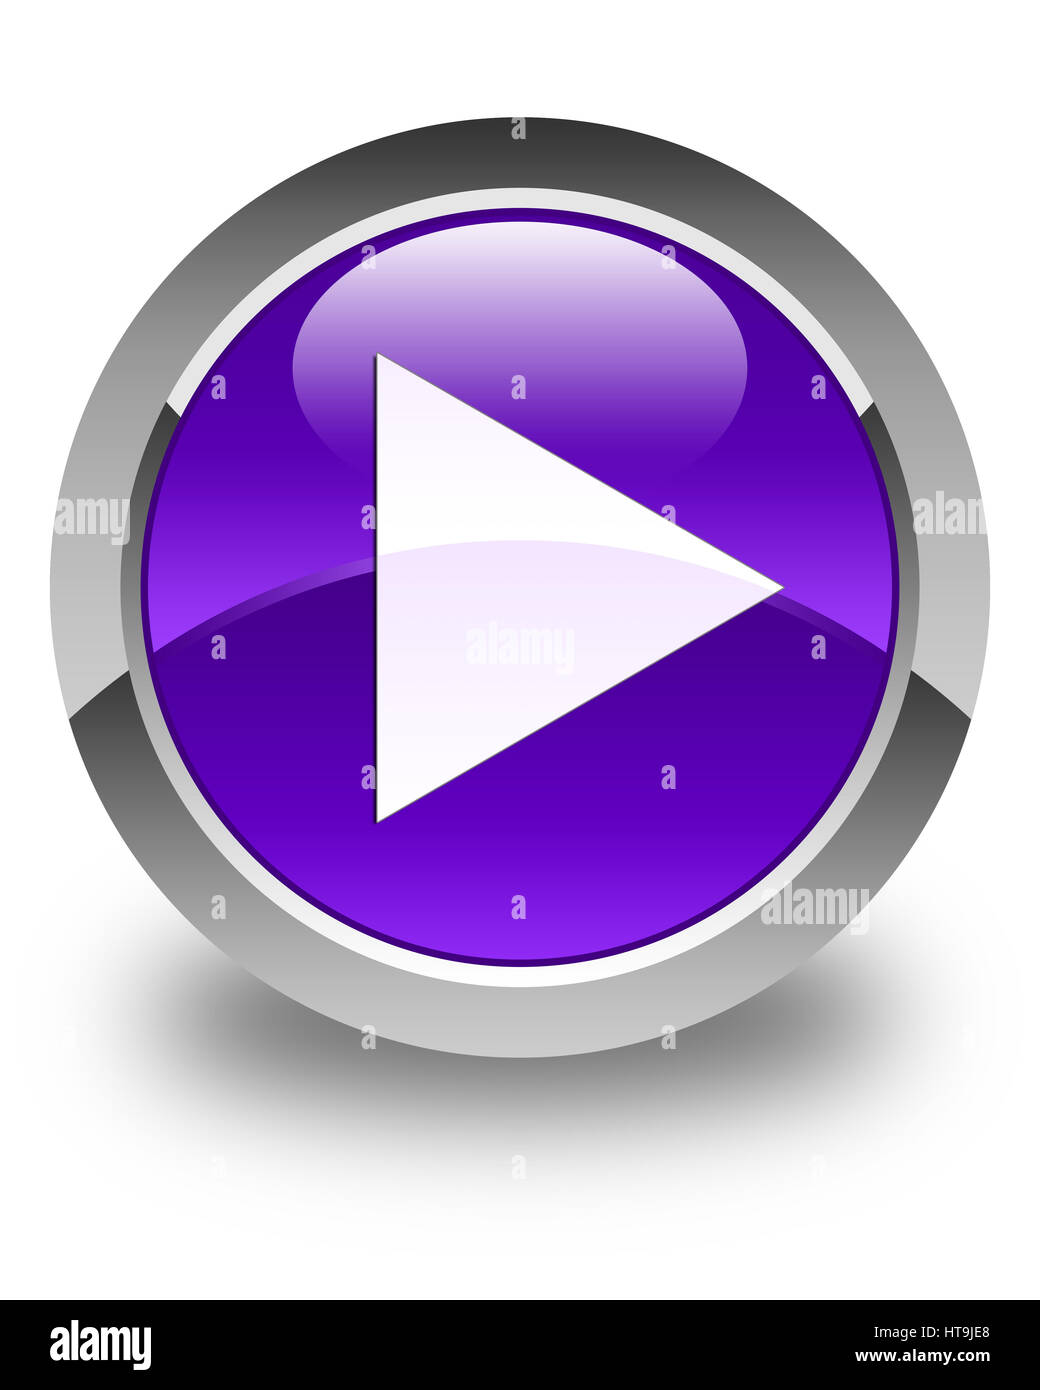 Play icon isolated on glossy purple round button abstract illustration Stock Photo